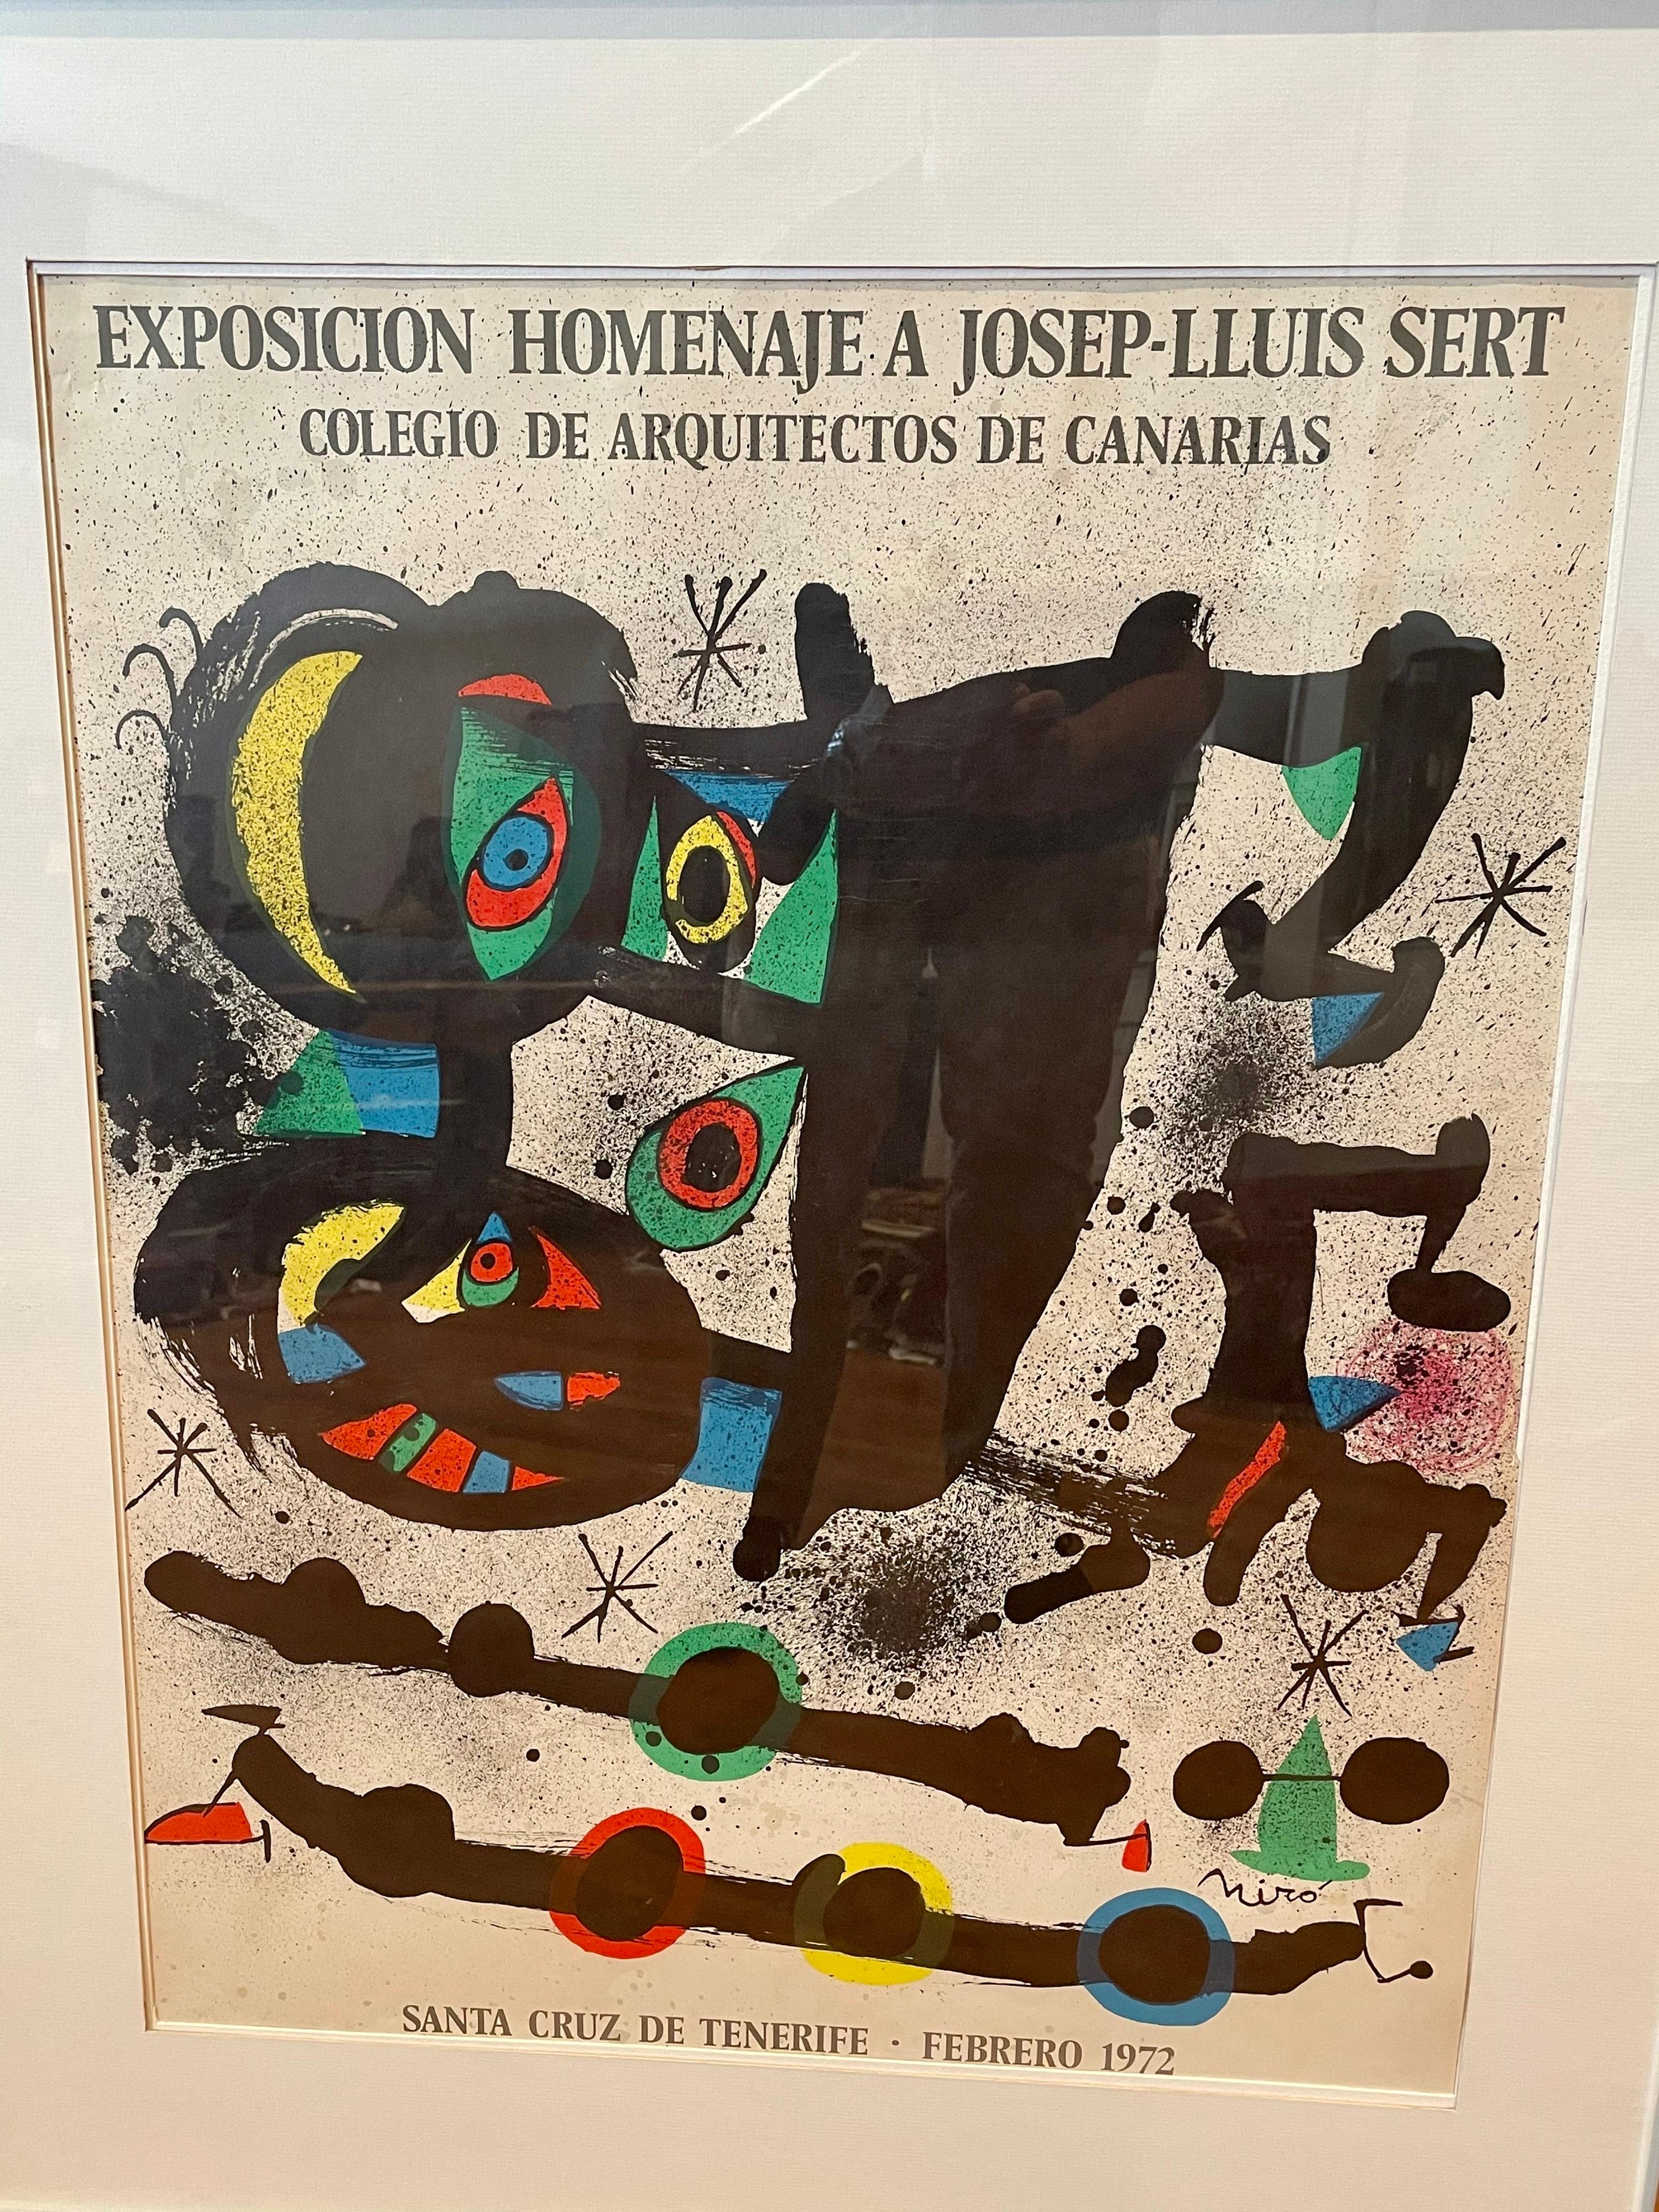 Original aluminium framed original vintage poster from Spanish artist, Joan Miro Canarias Spain exhibition, February 1972 Spain nice condition vibrant colors not faded or stained. Highly collectible.